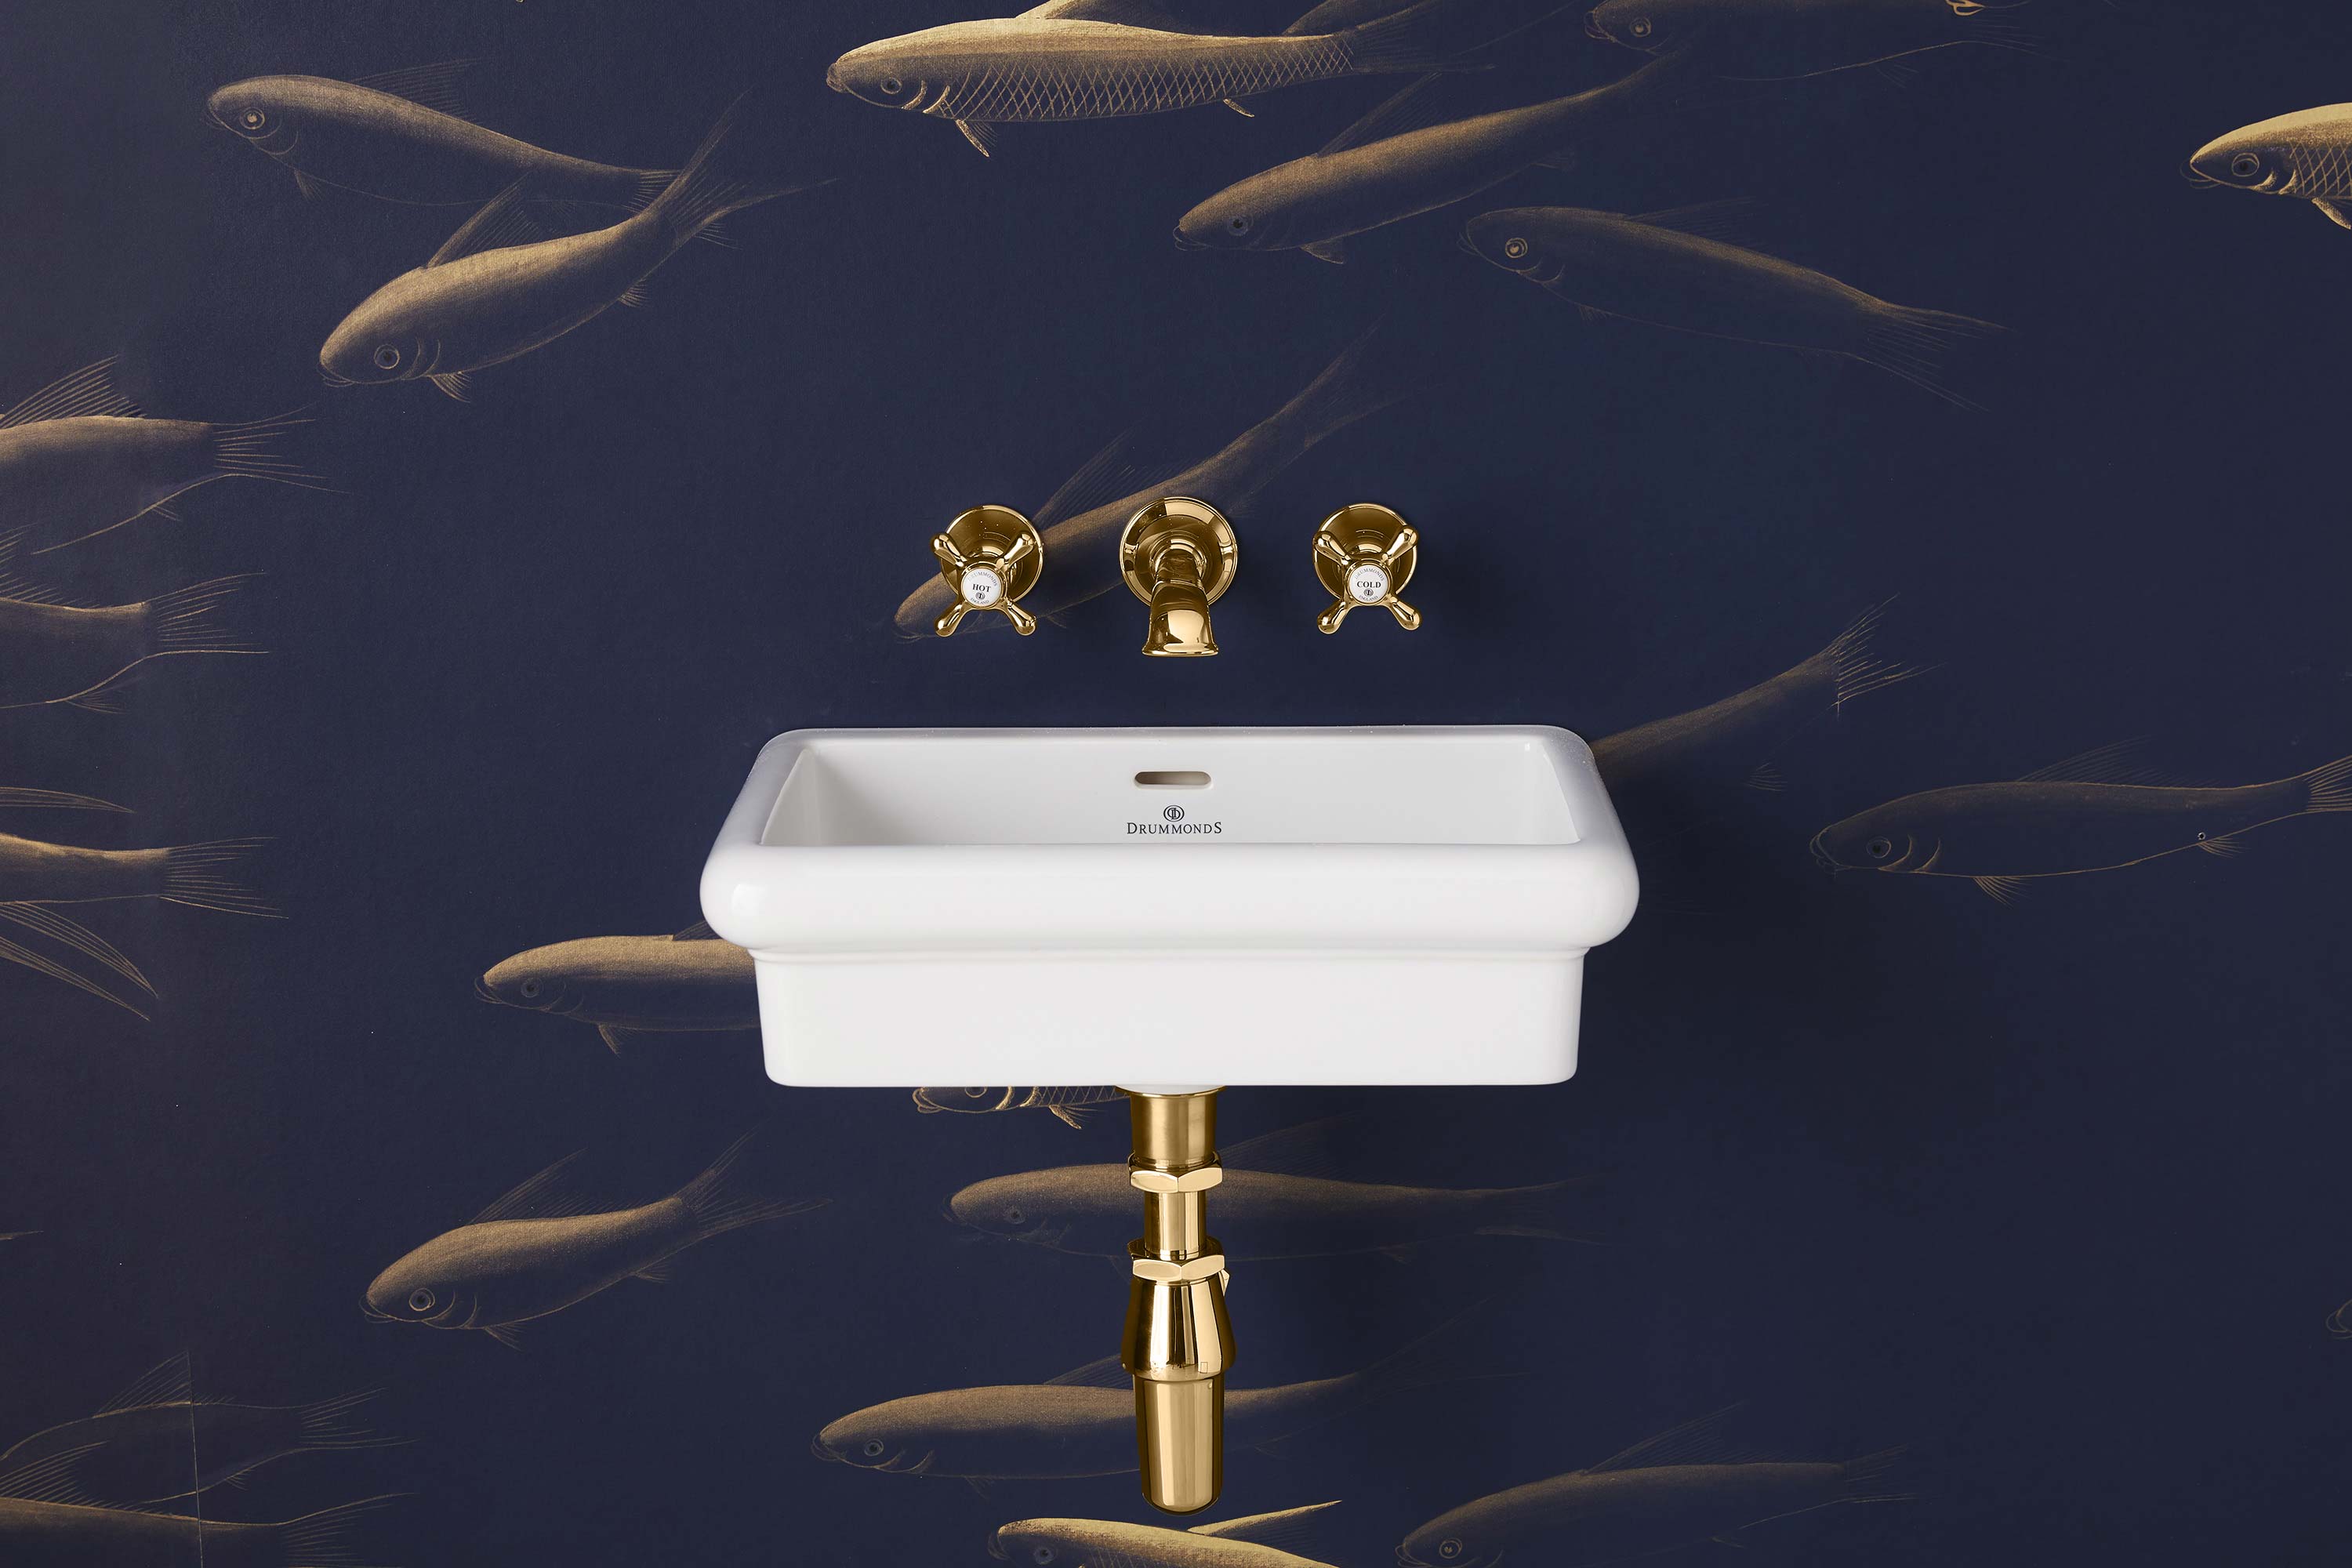 The Bourne Wall Mounted Vanity Basin in brass finish